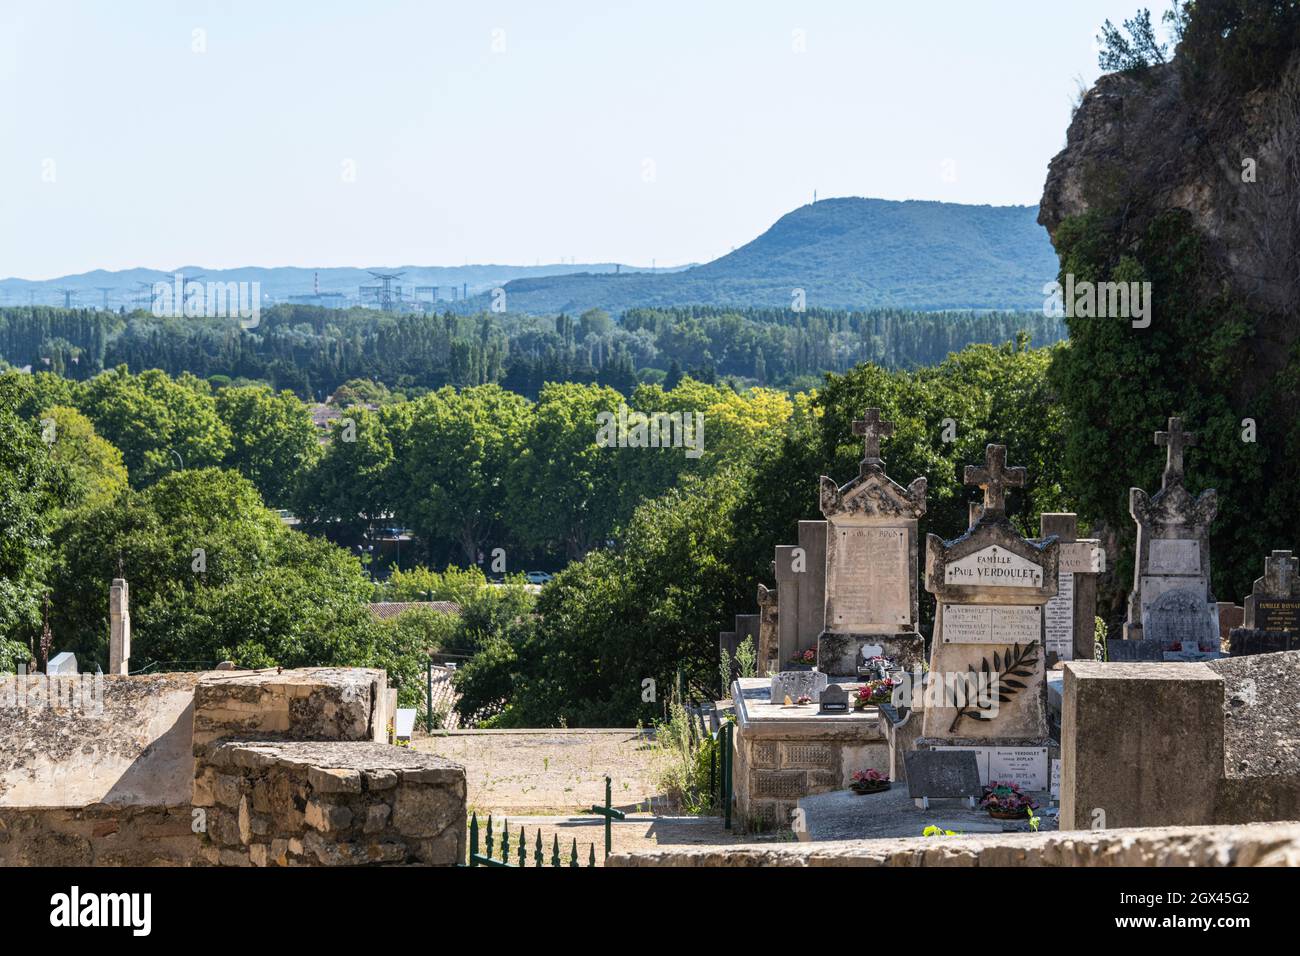 The churchyard at The 12th Century Notre Dame de Val Romigier, Mornas, Provence, France. Stock Photo